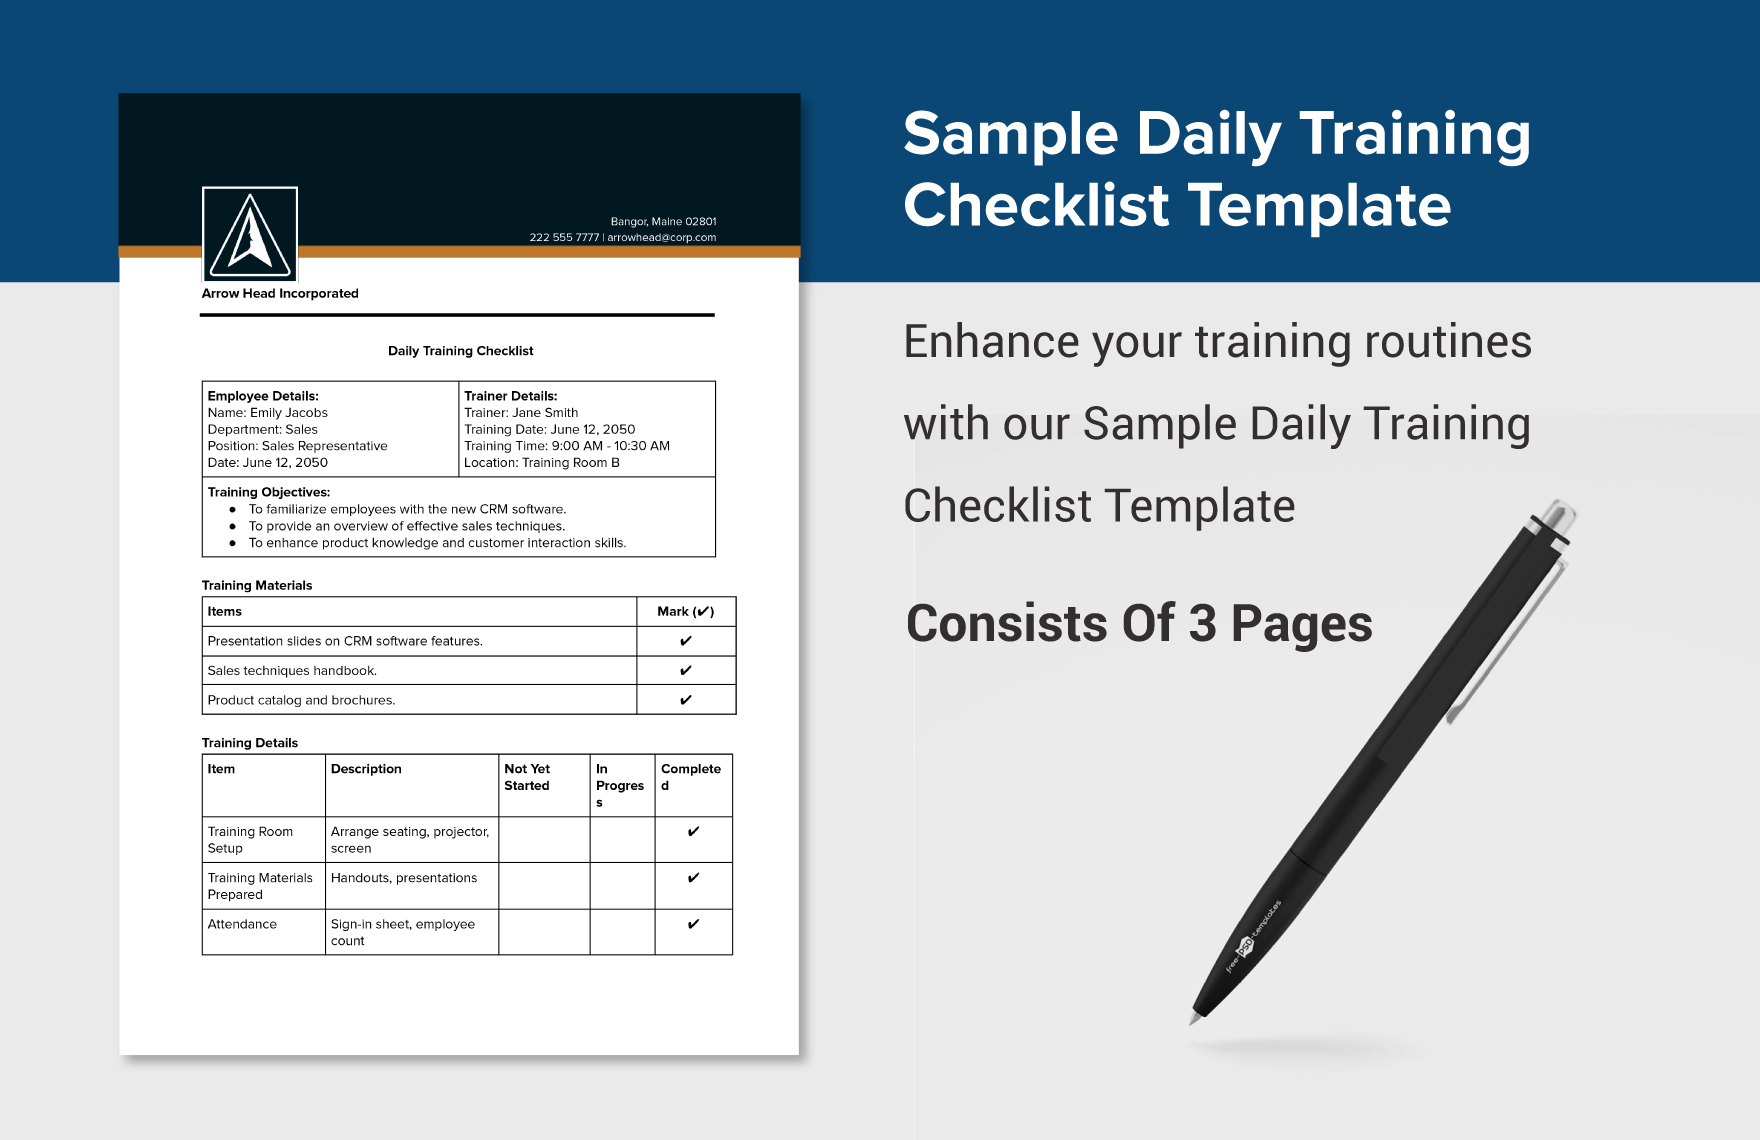 Sample Daily Training Checklist Template